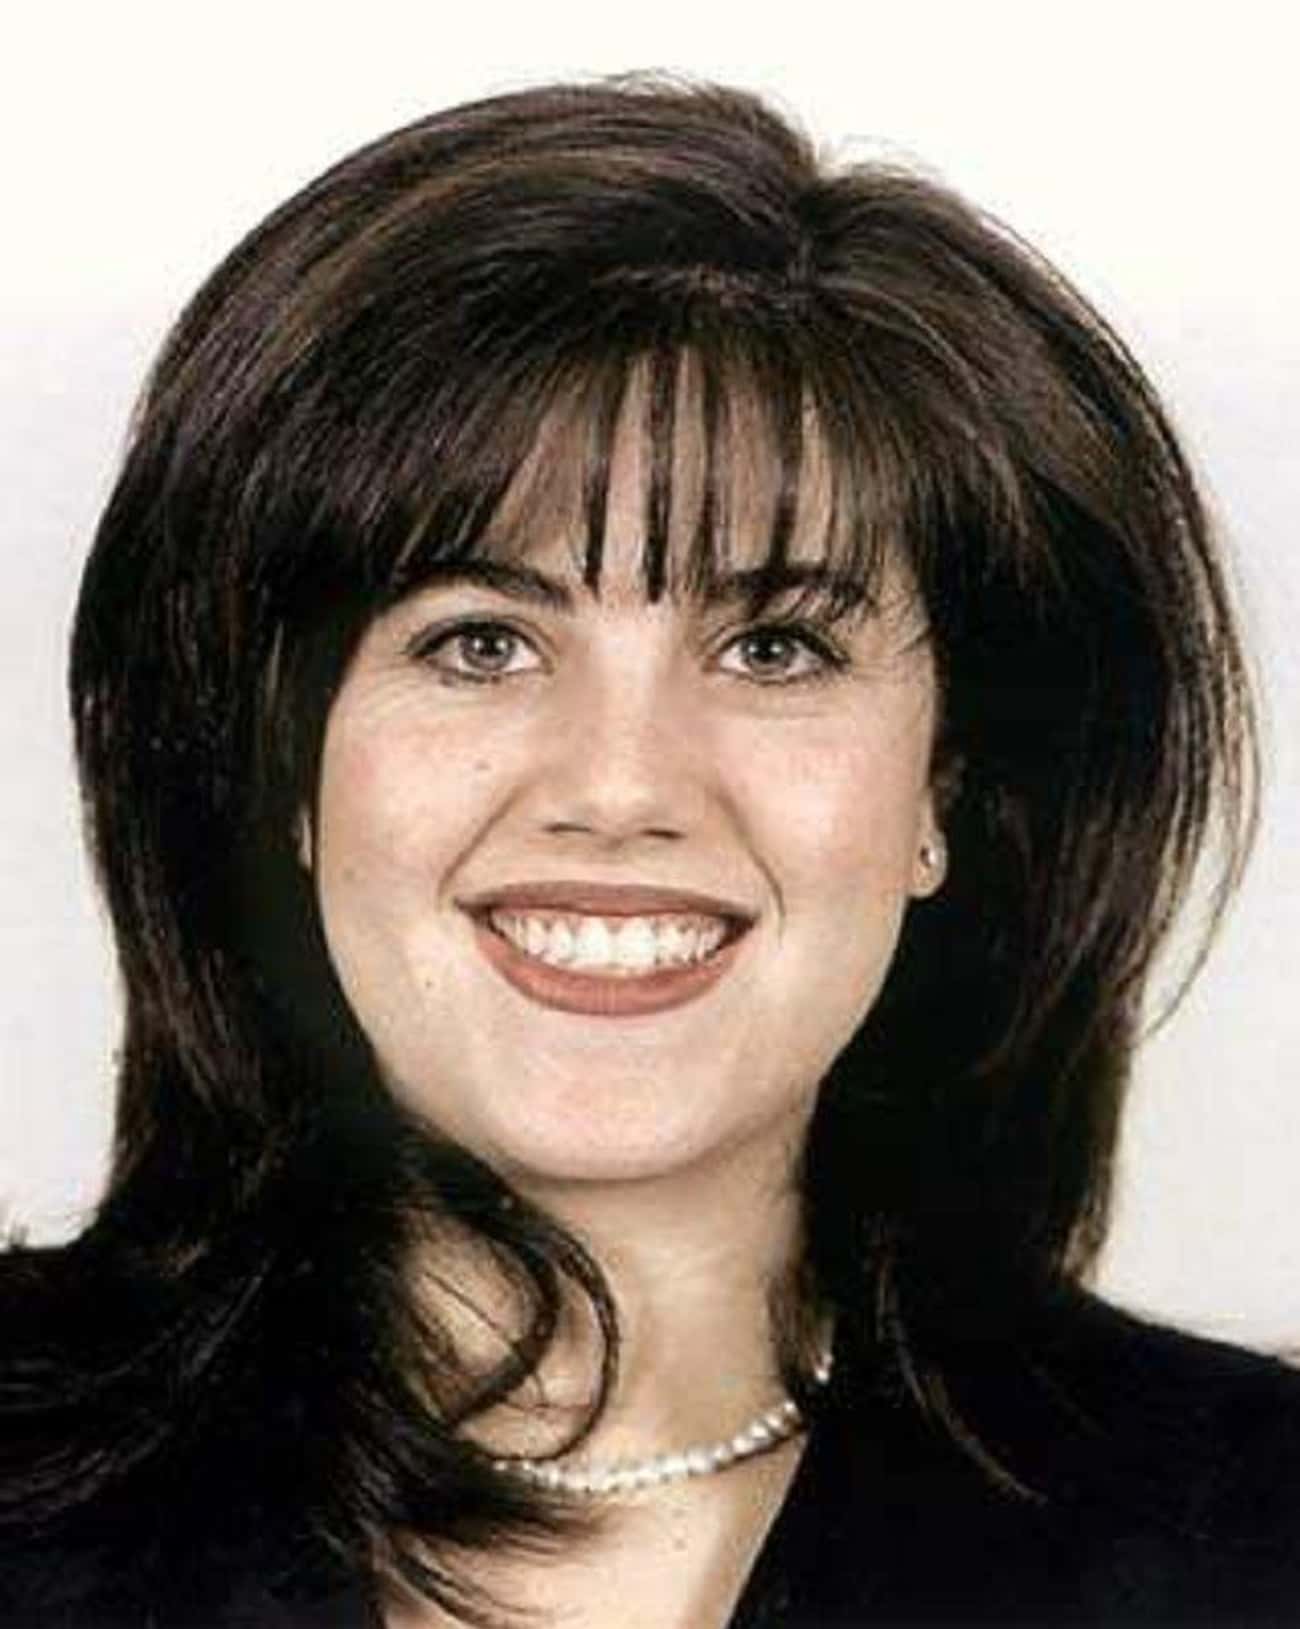 Lewinsky Was Only 21 When The Affair Between Her And 49-Year-Old Clinton Began